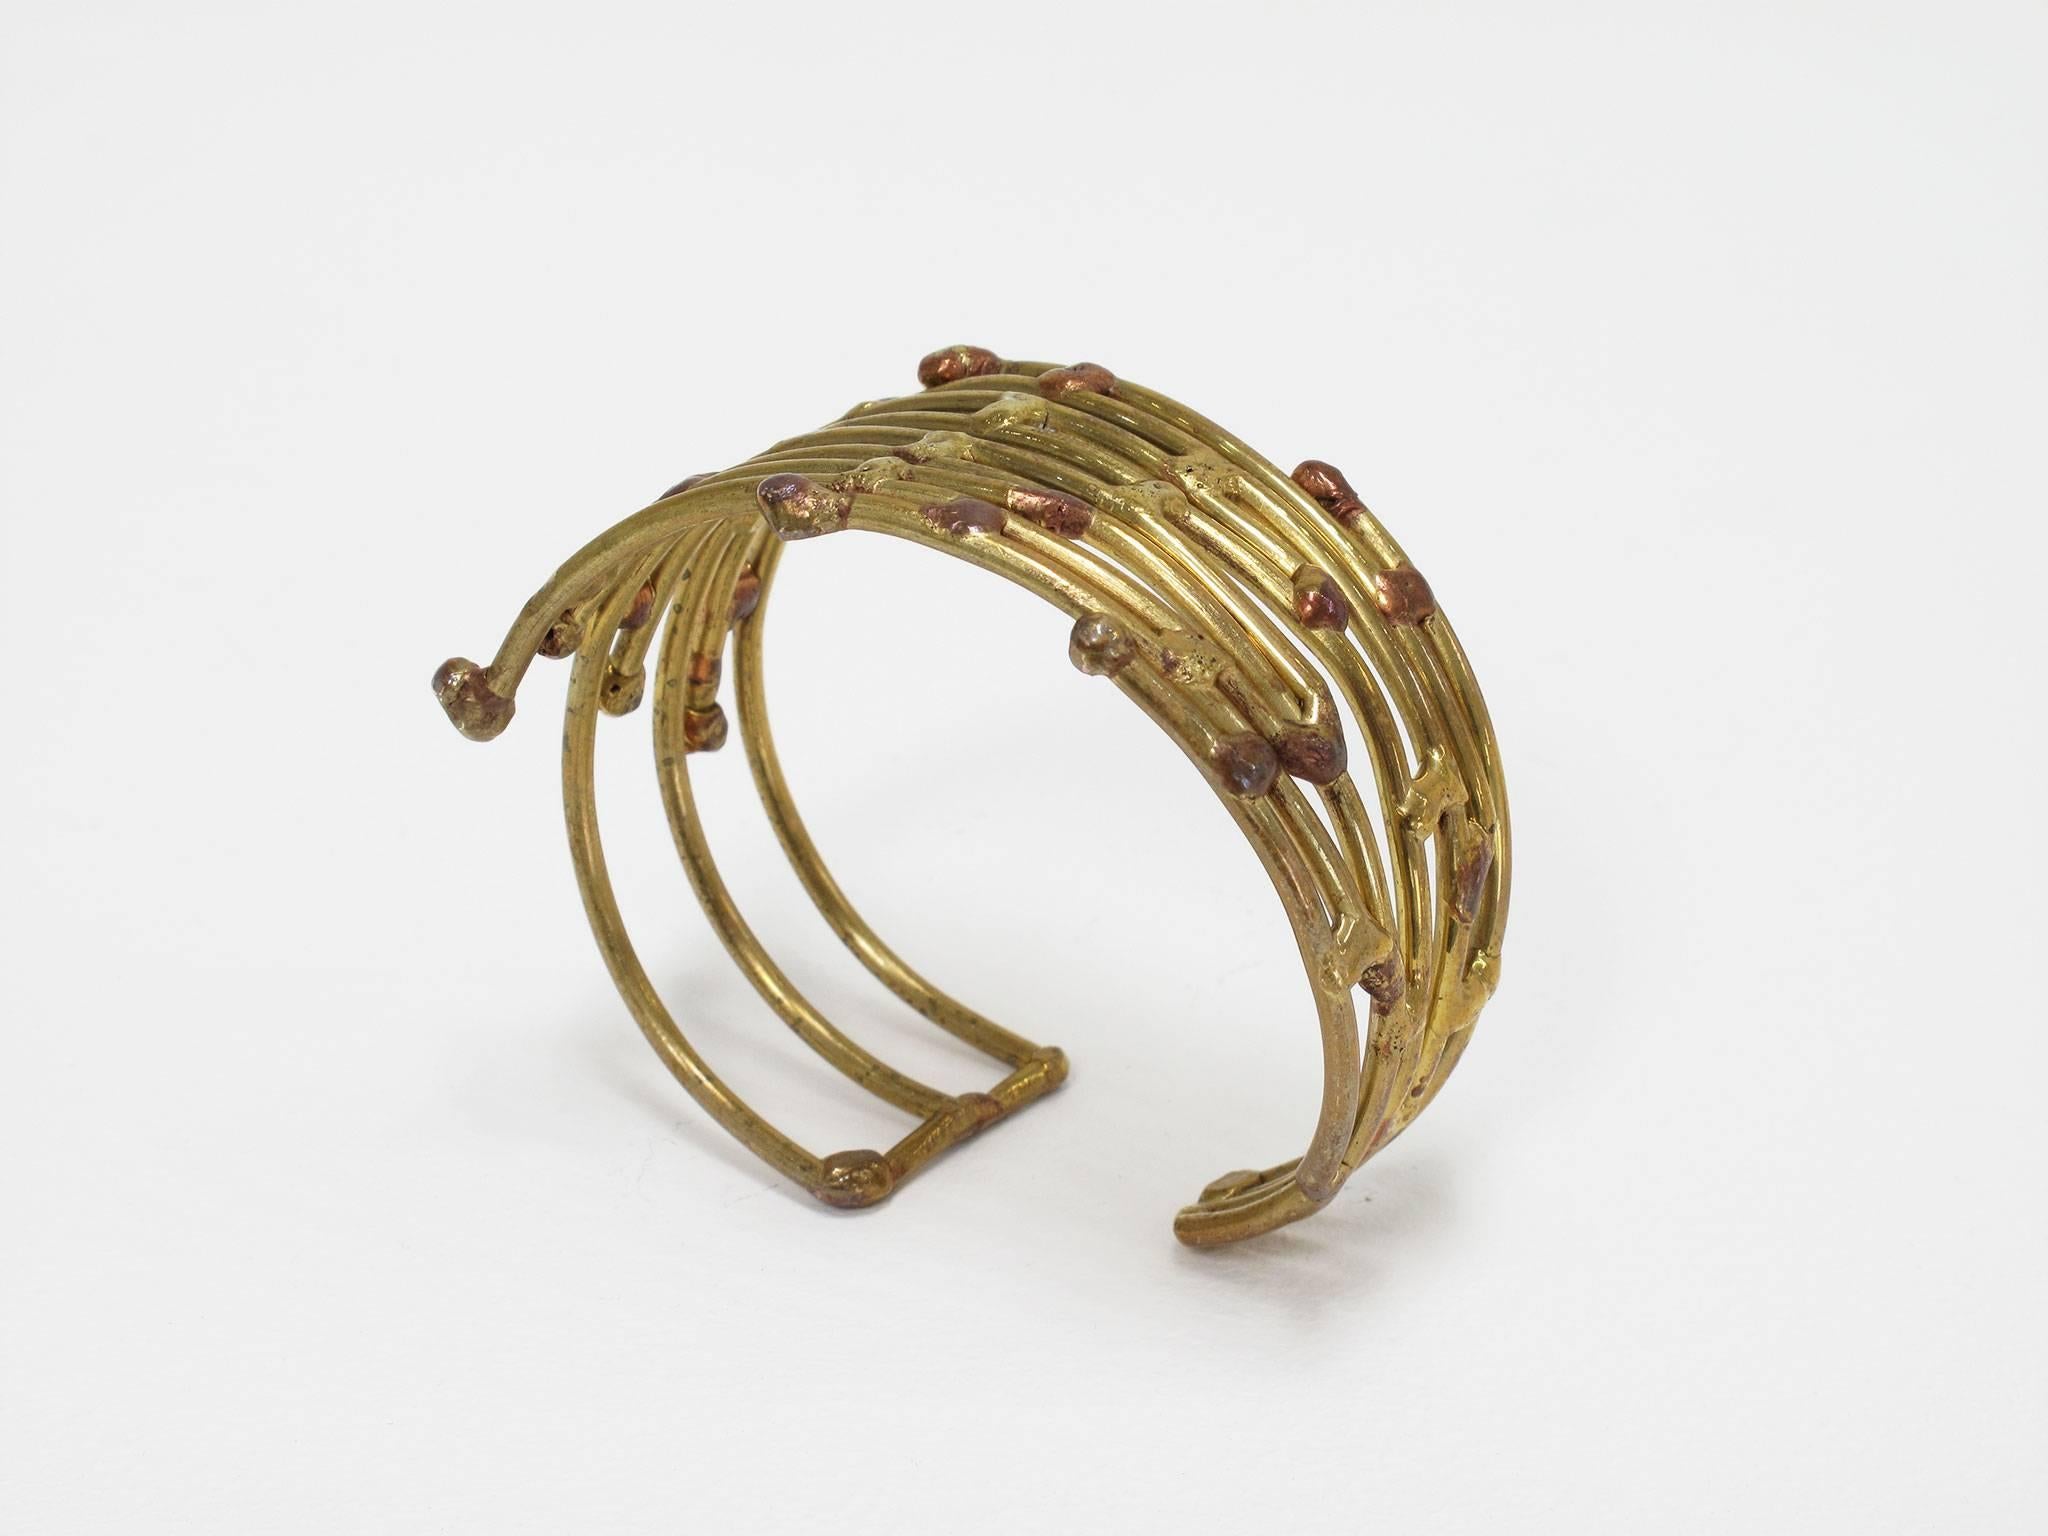 Handmade Vintage Copper and Brass Cuff Bracelet In Good Condition For Sale In Los Angeles, CA